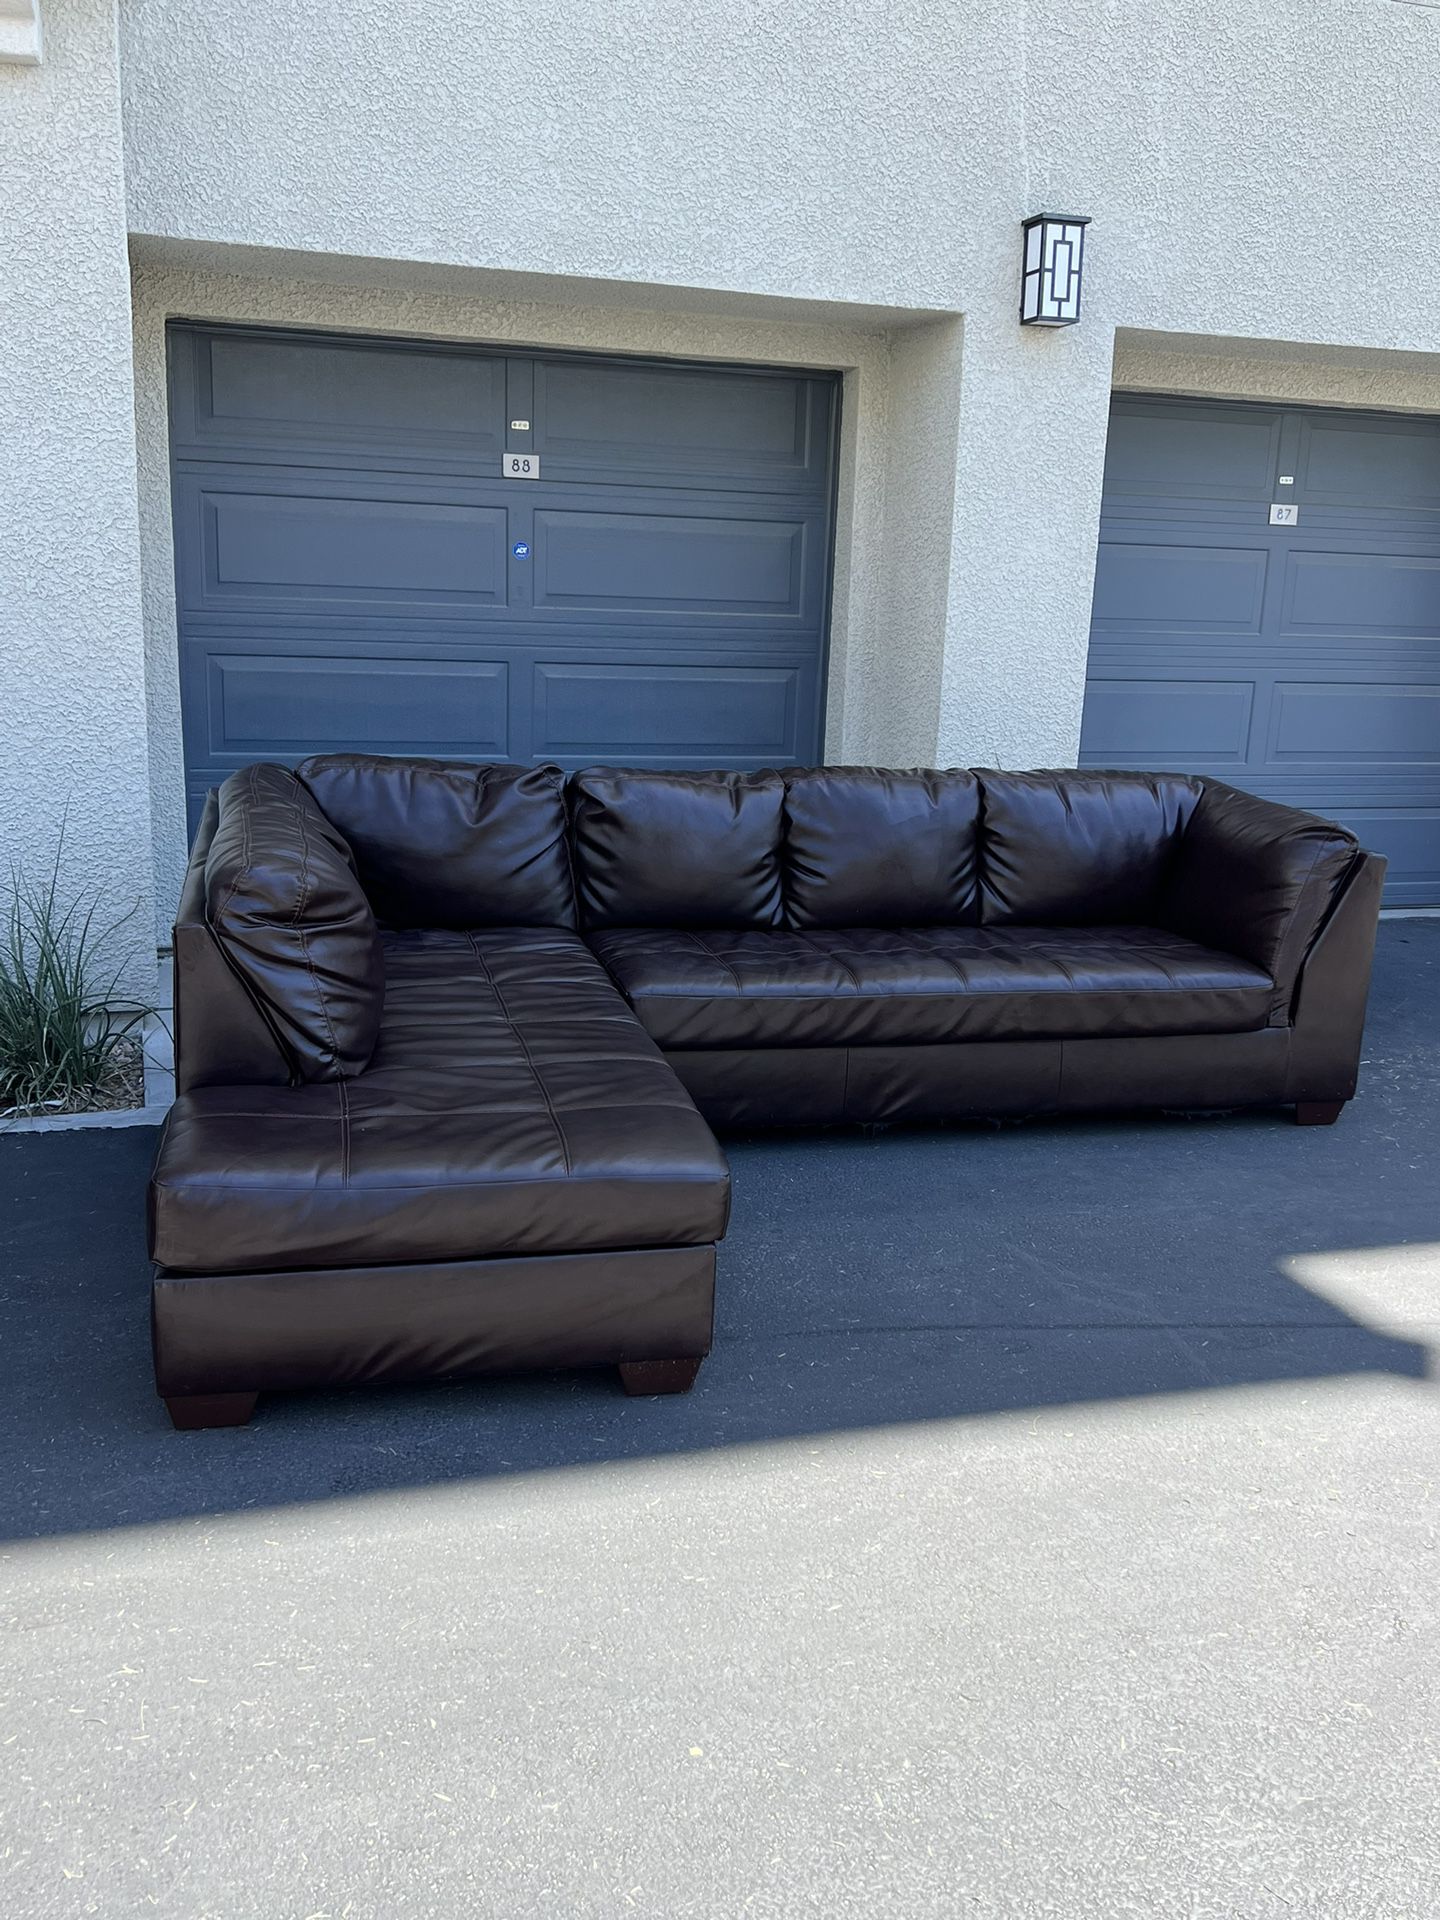 Ashely Furniture Sectional Couch (Pick Up Price)